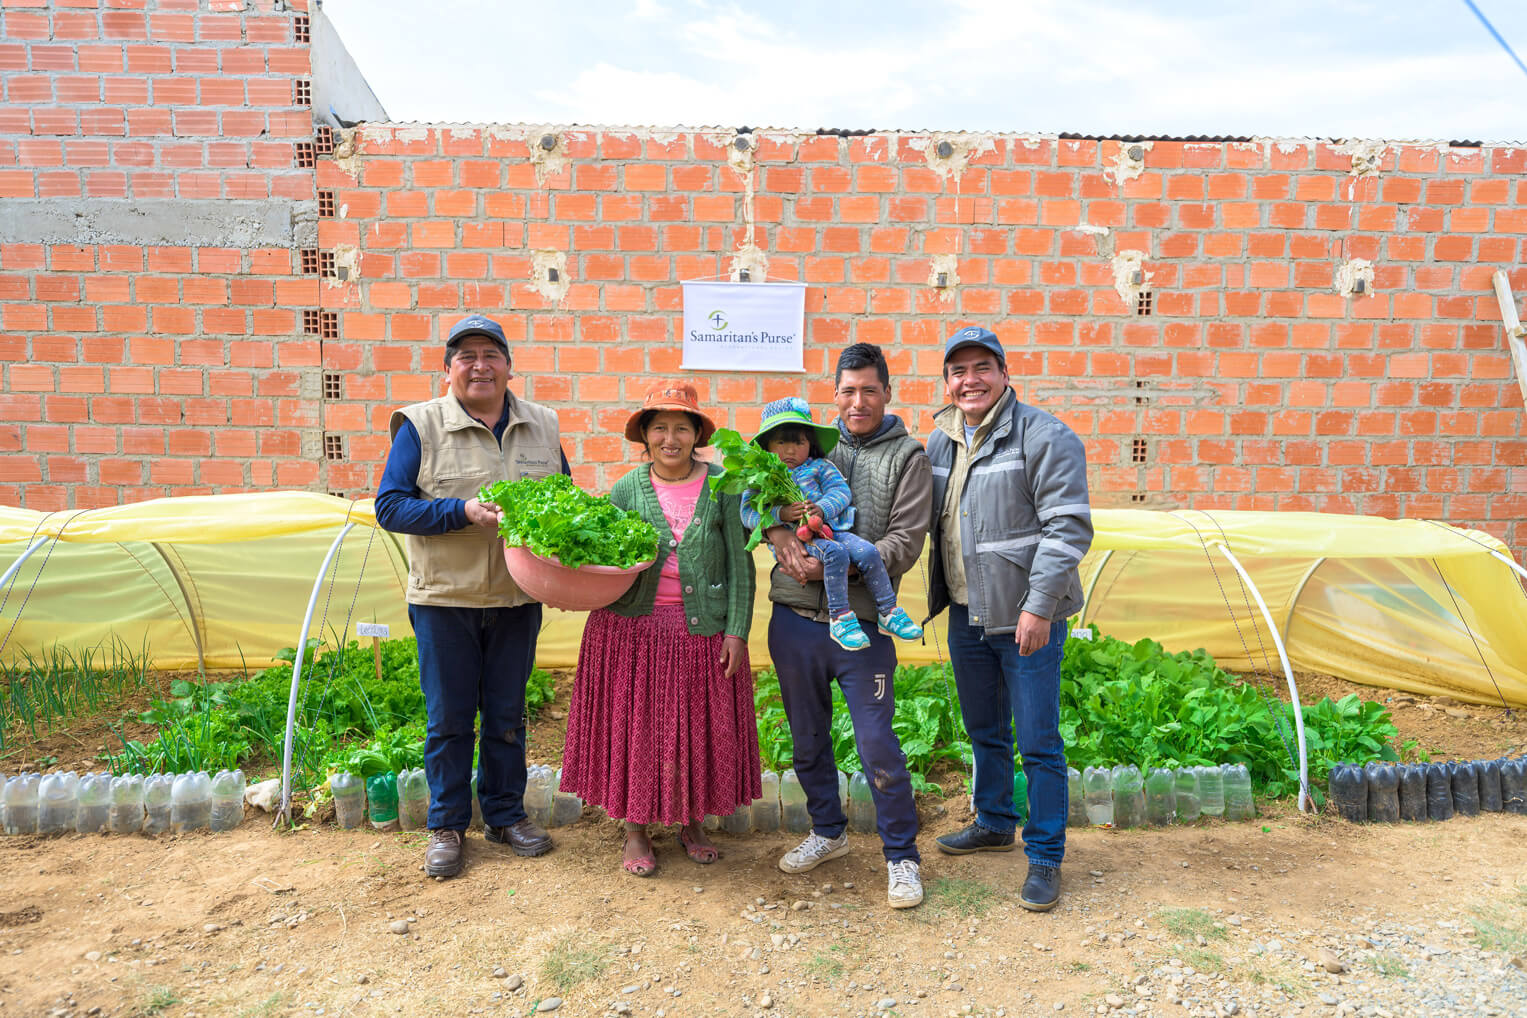 El Alto families are experiencing better health and nutrition as result of the Samaritan's Purse program.